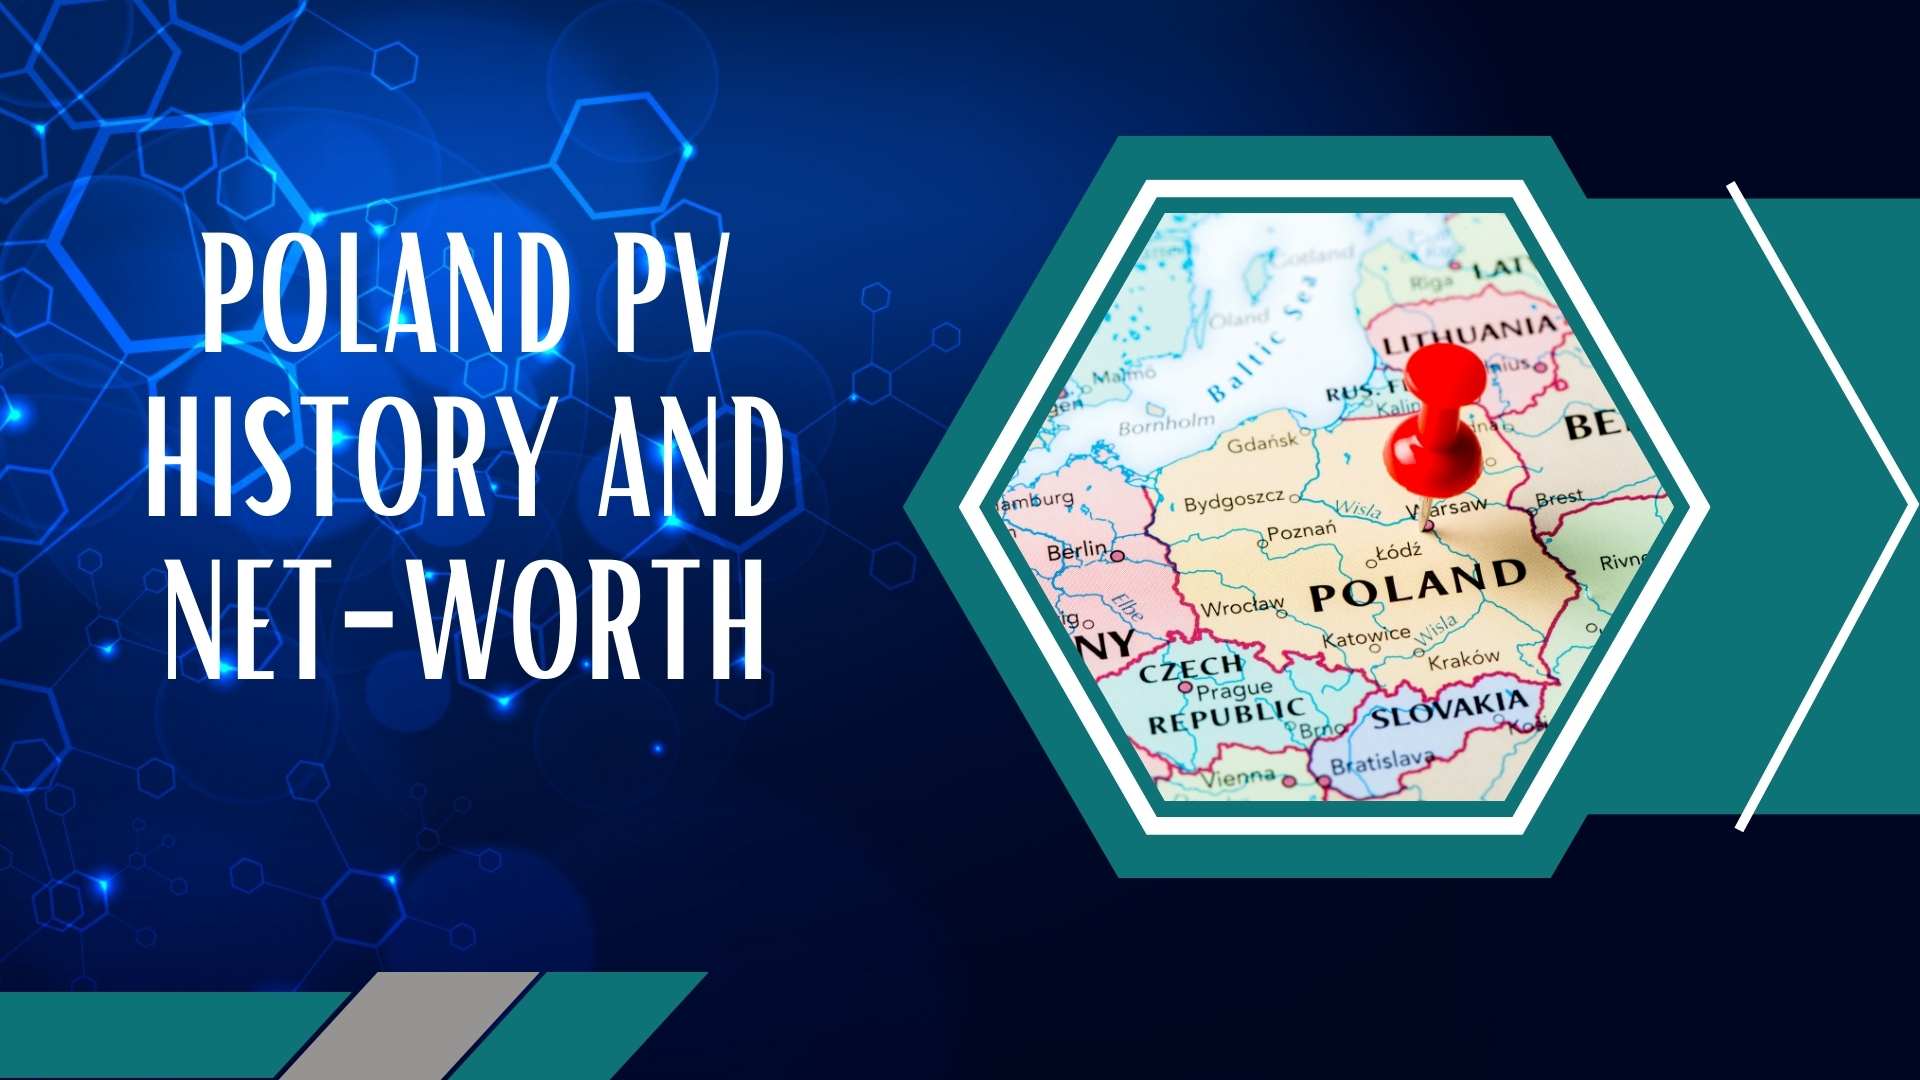 Poland PV history and net-worth